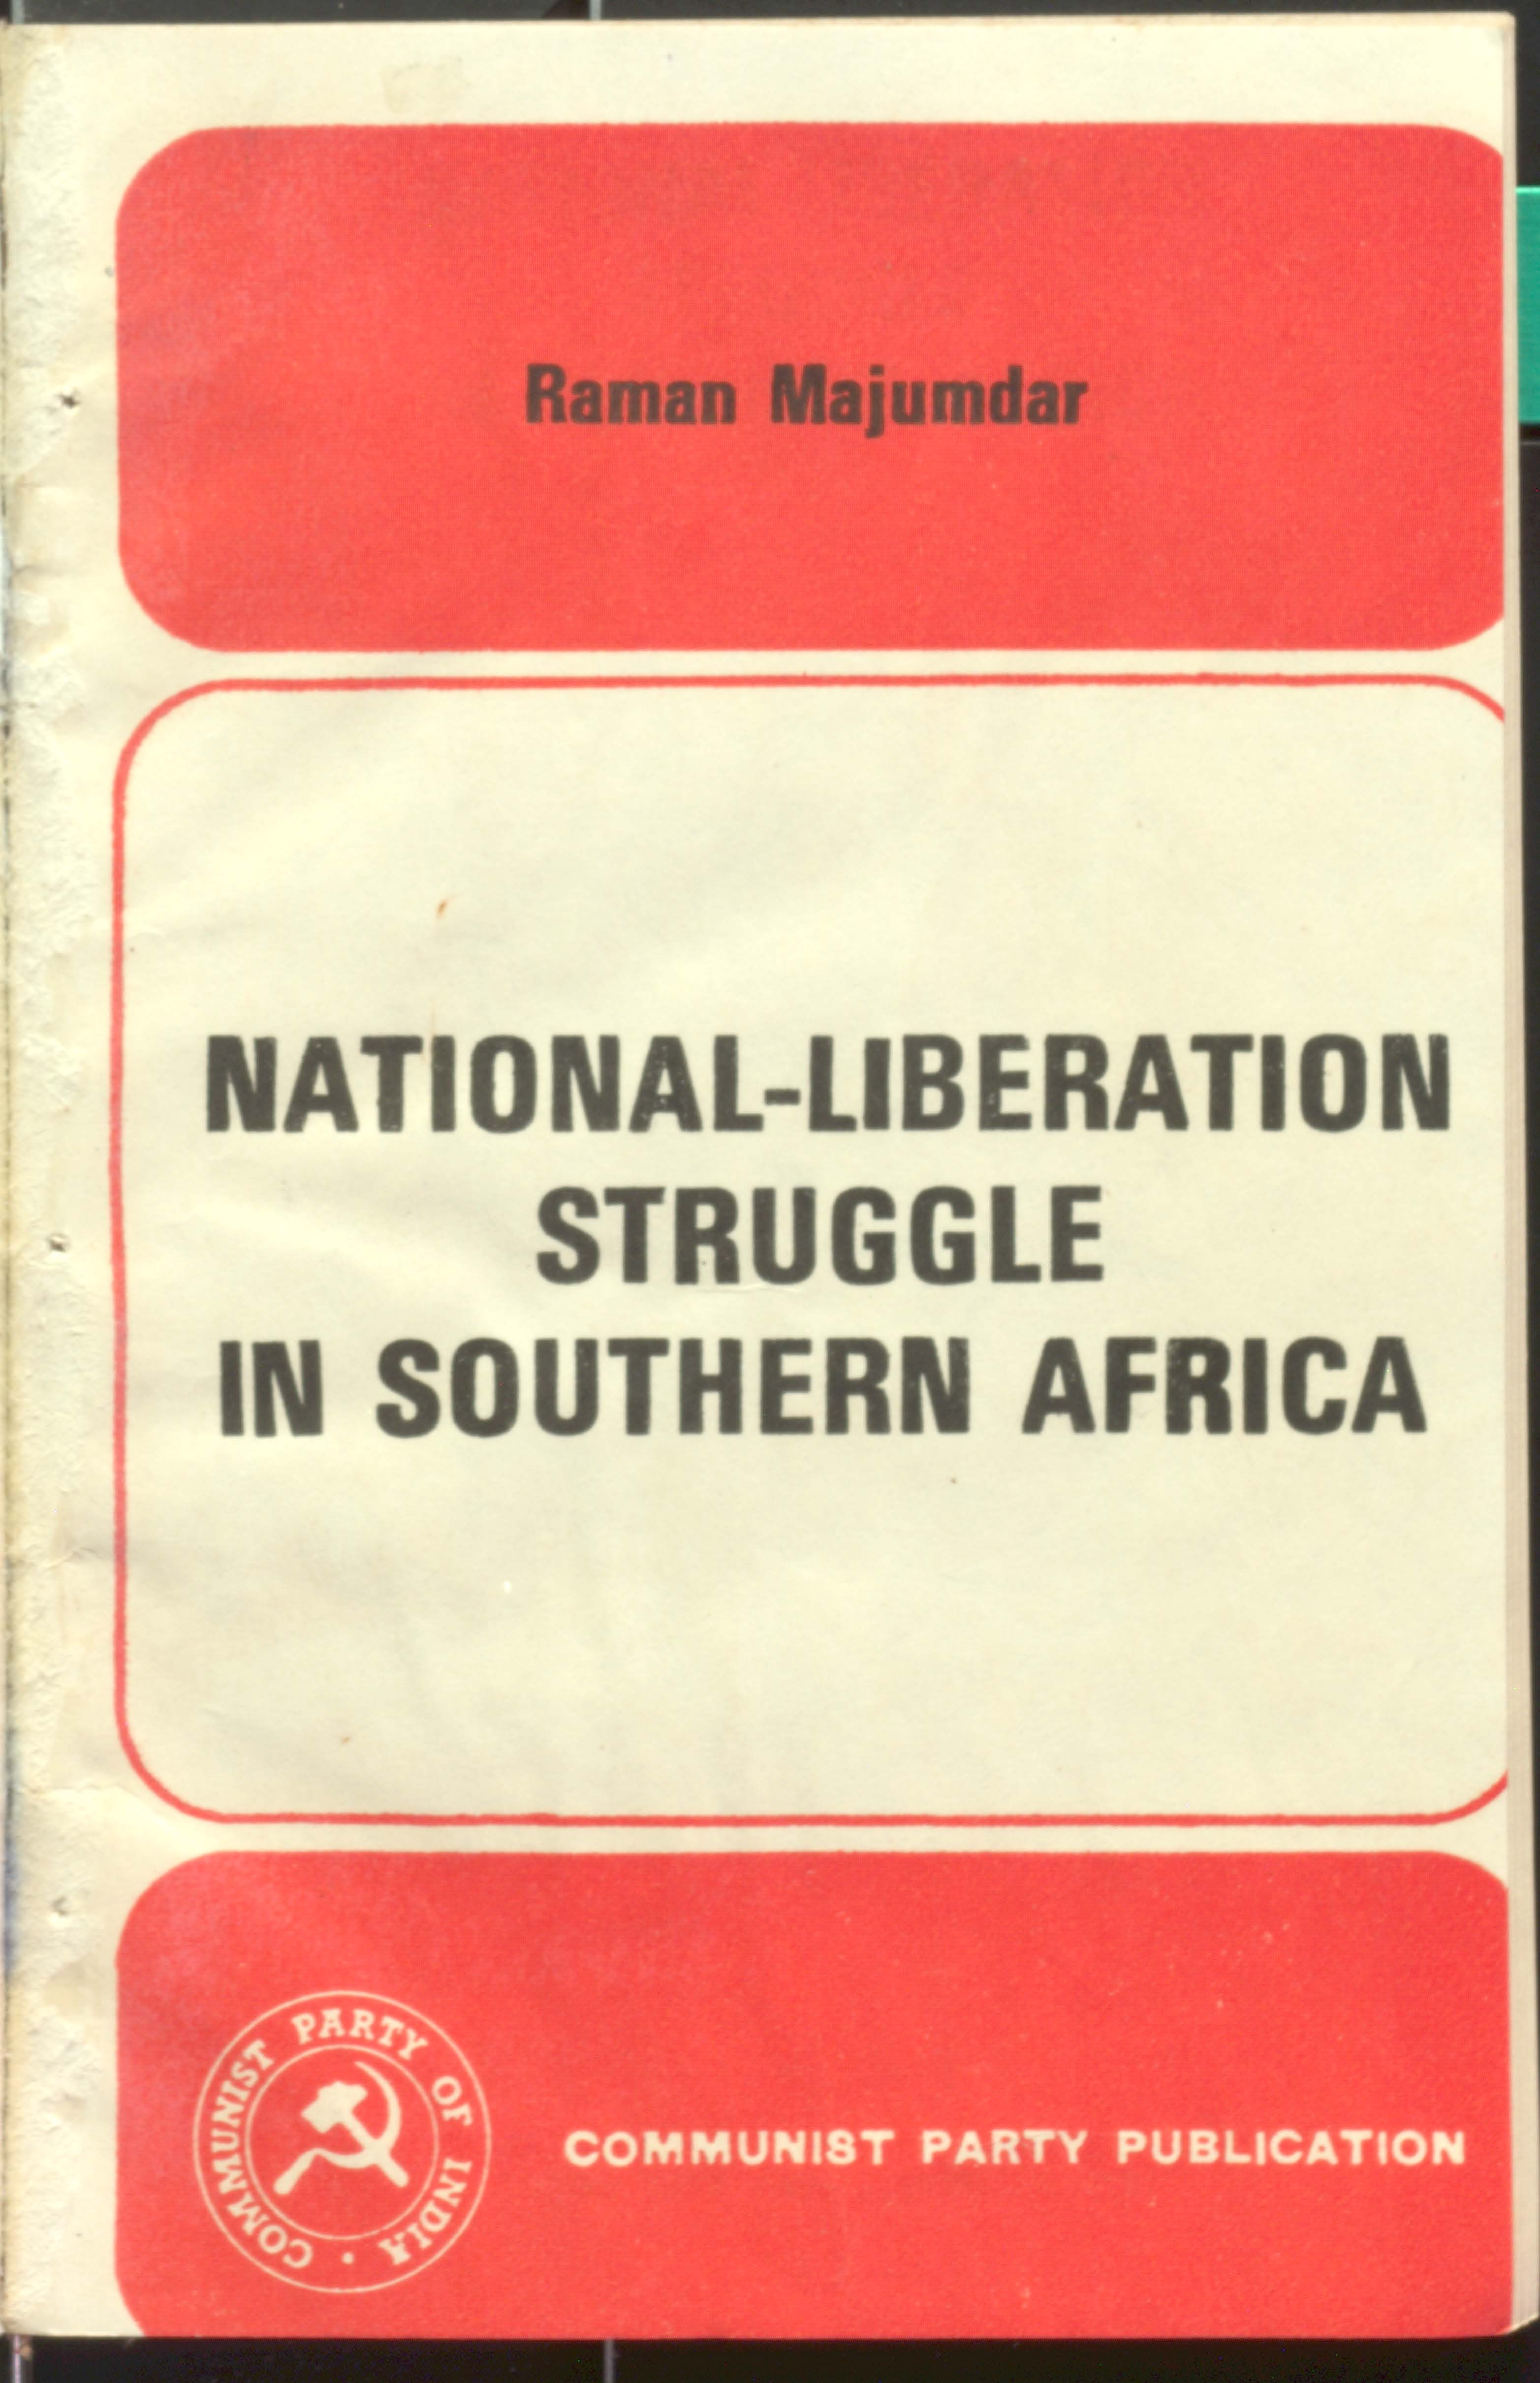 Natioinal-Liberation Struggule In Southern Africa